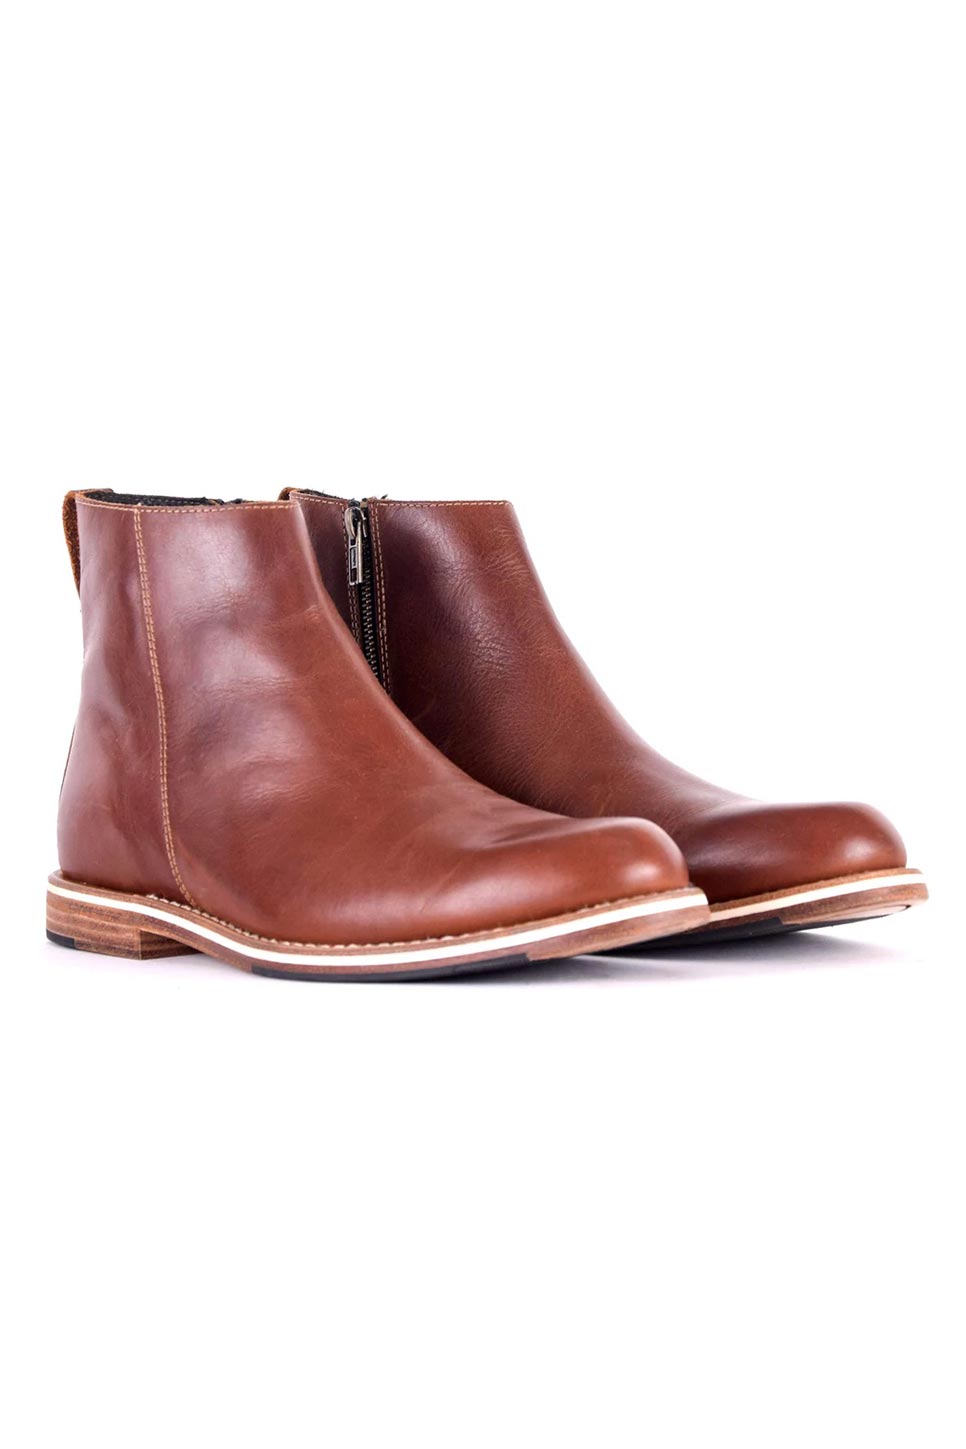 Helm Boots - The Pablo - Brown